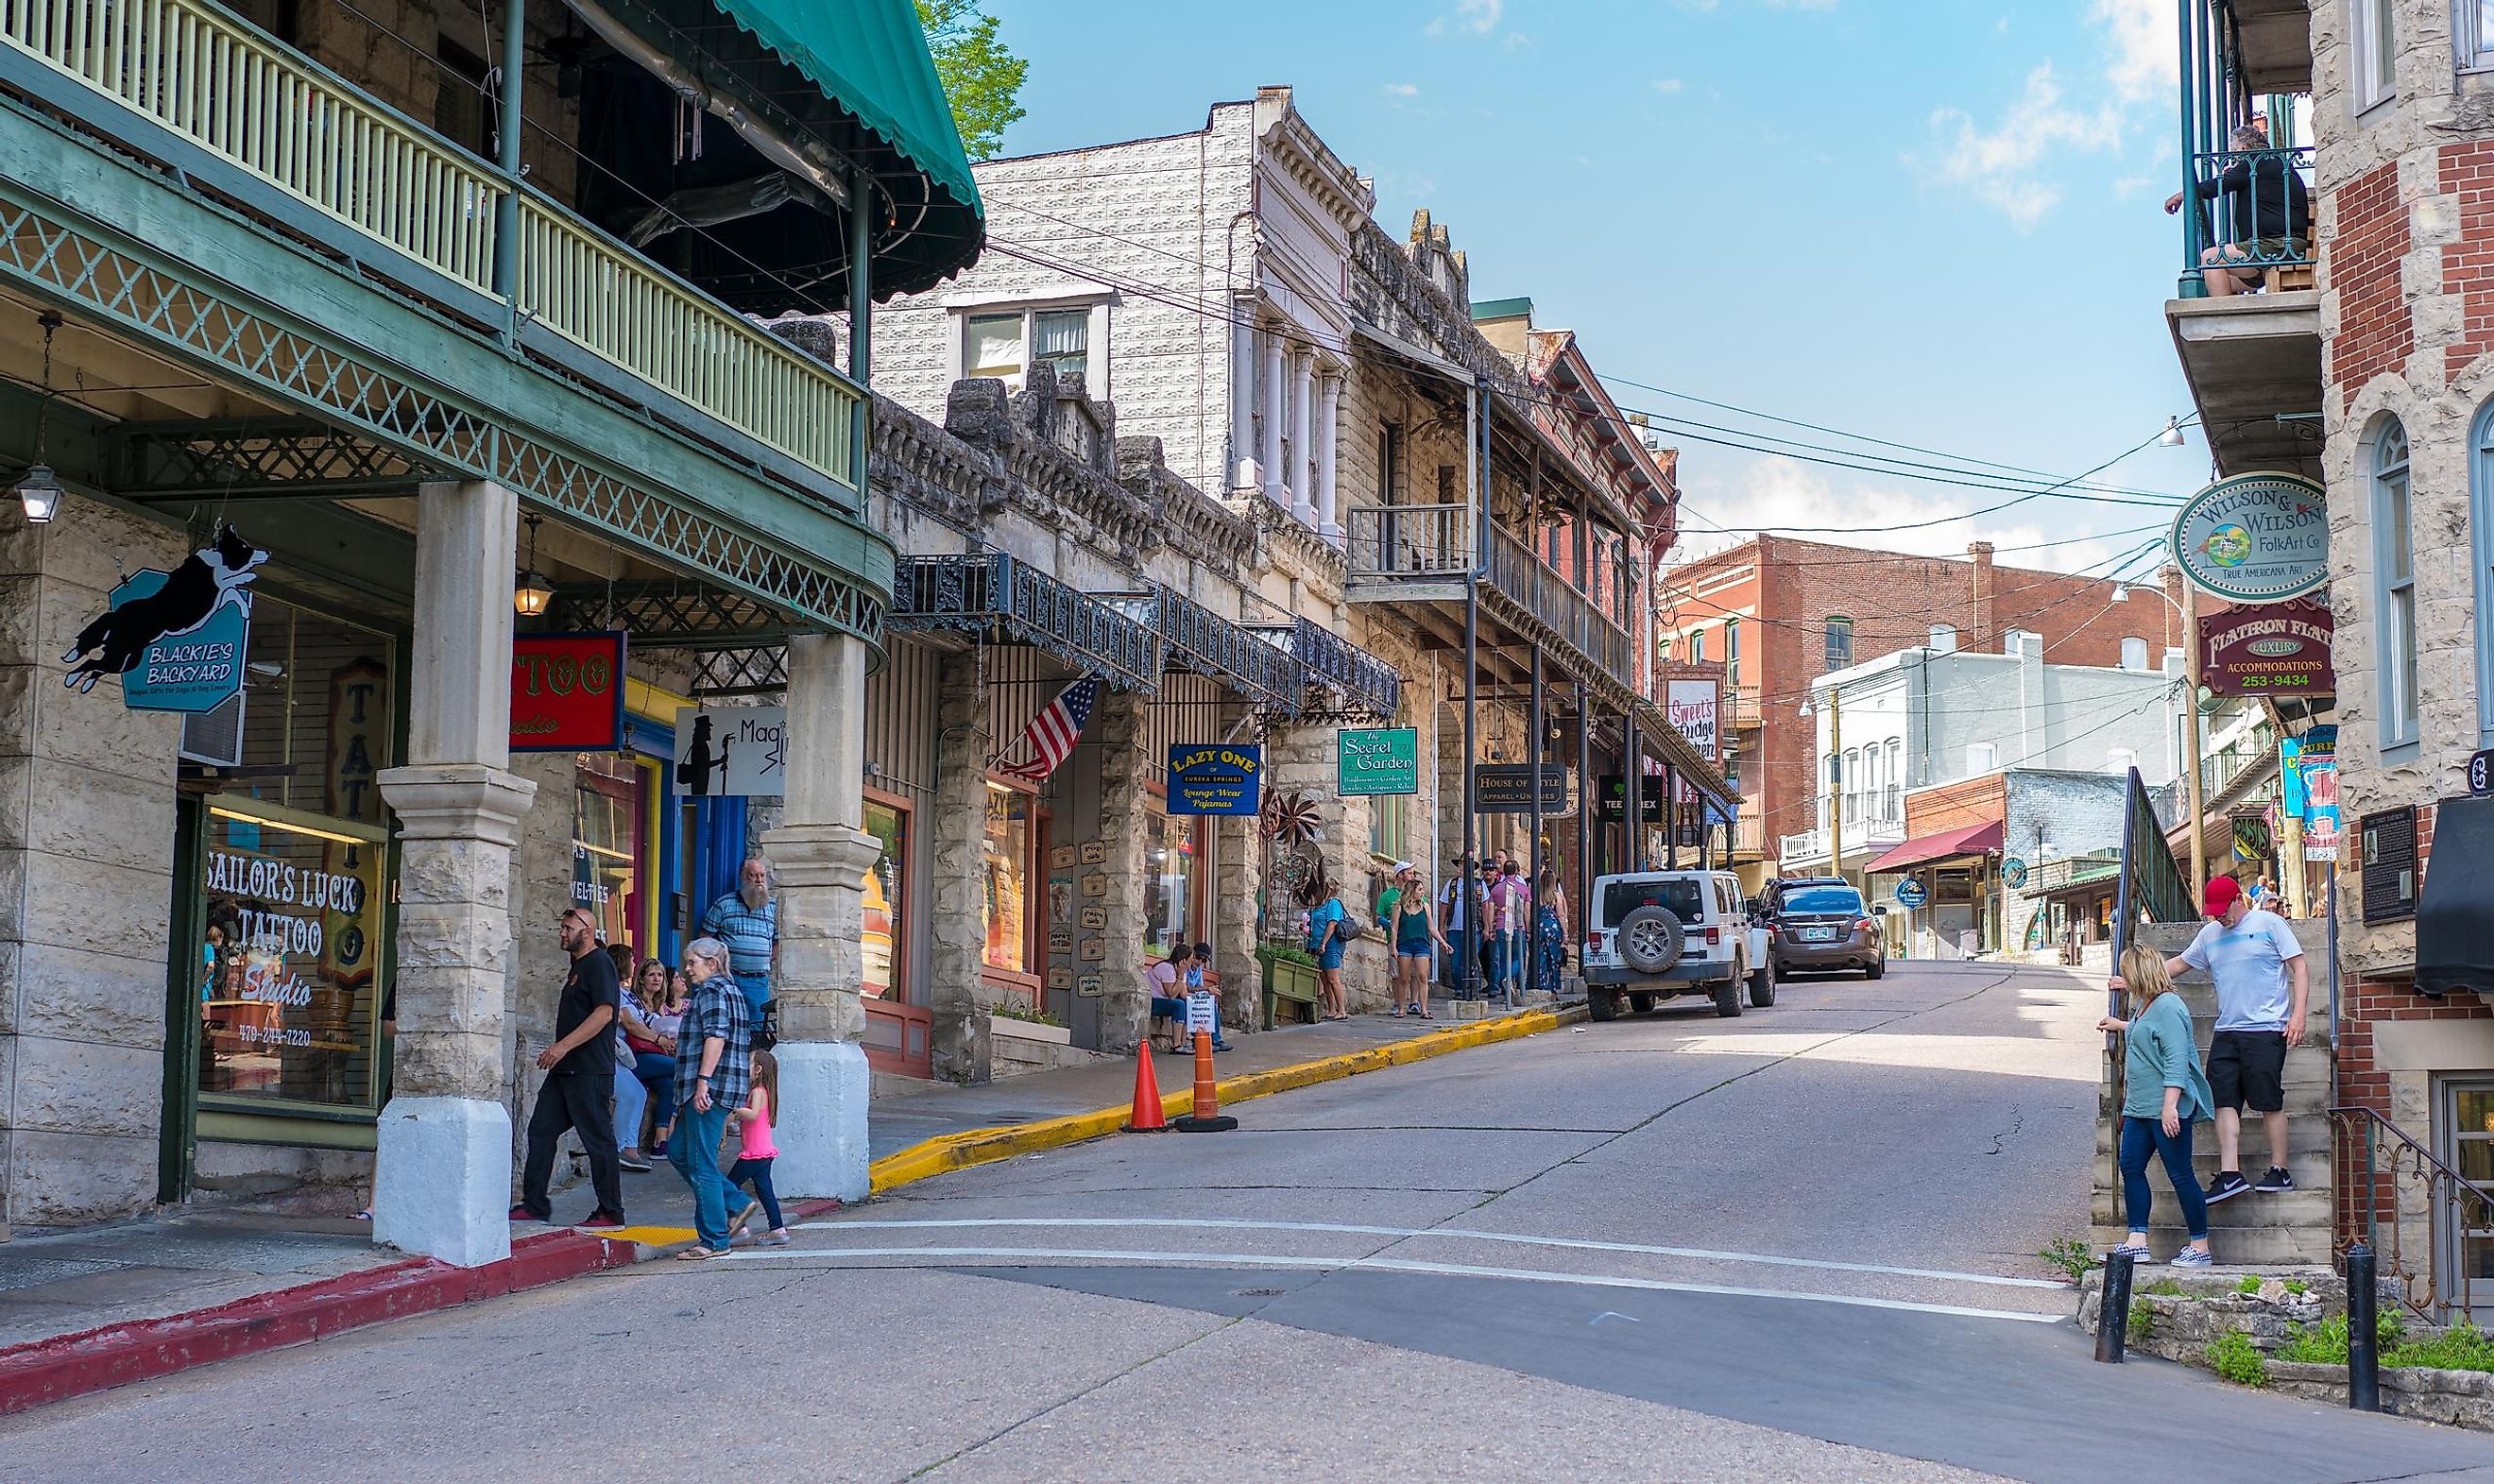 Charming street view of downtown Eureka Springs, Arkansas, known for its vibrant shops and bustling commerce, a must-visit destination in Northwest Arkansas. Editorial credit: shuttersv / Shutterstock.com